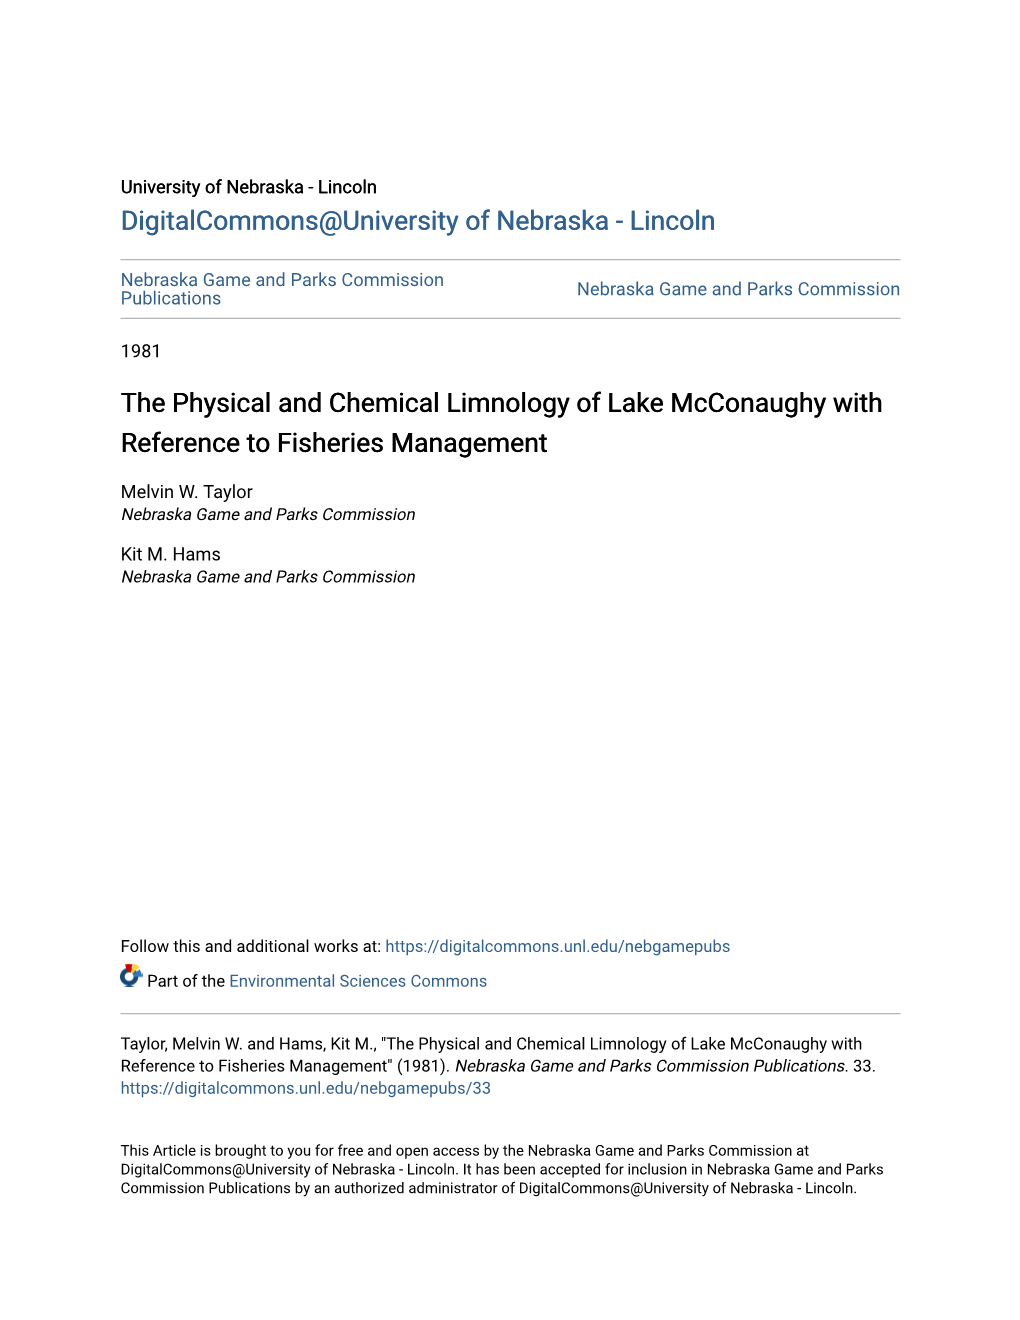 The Physical and Chemical Limnology of Lake Mcconaughy with Reference to Fisheries Management